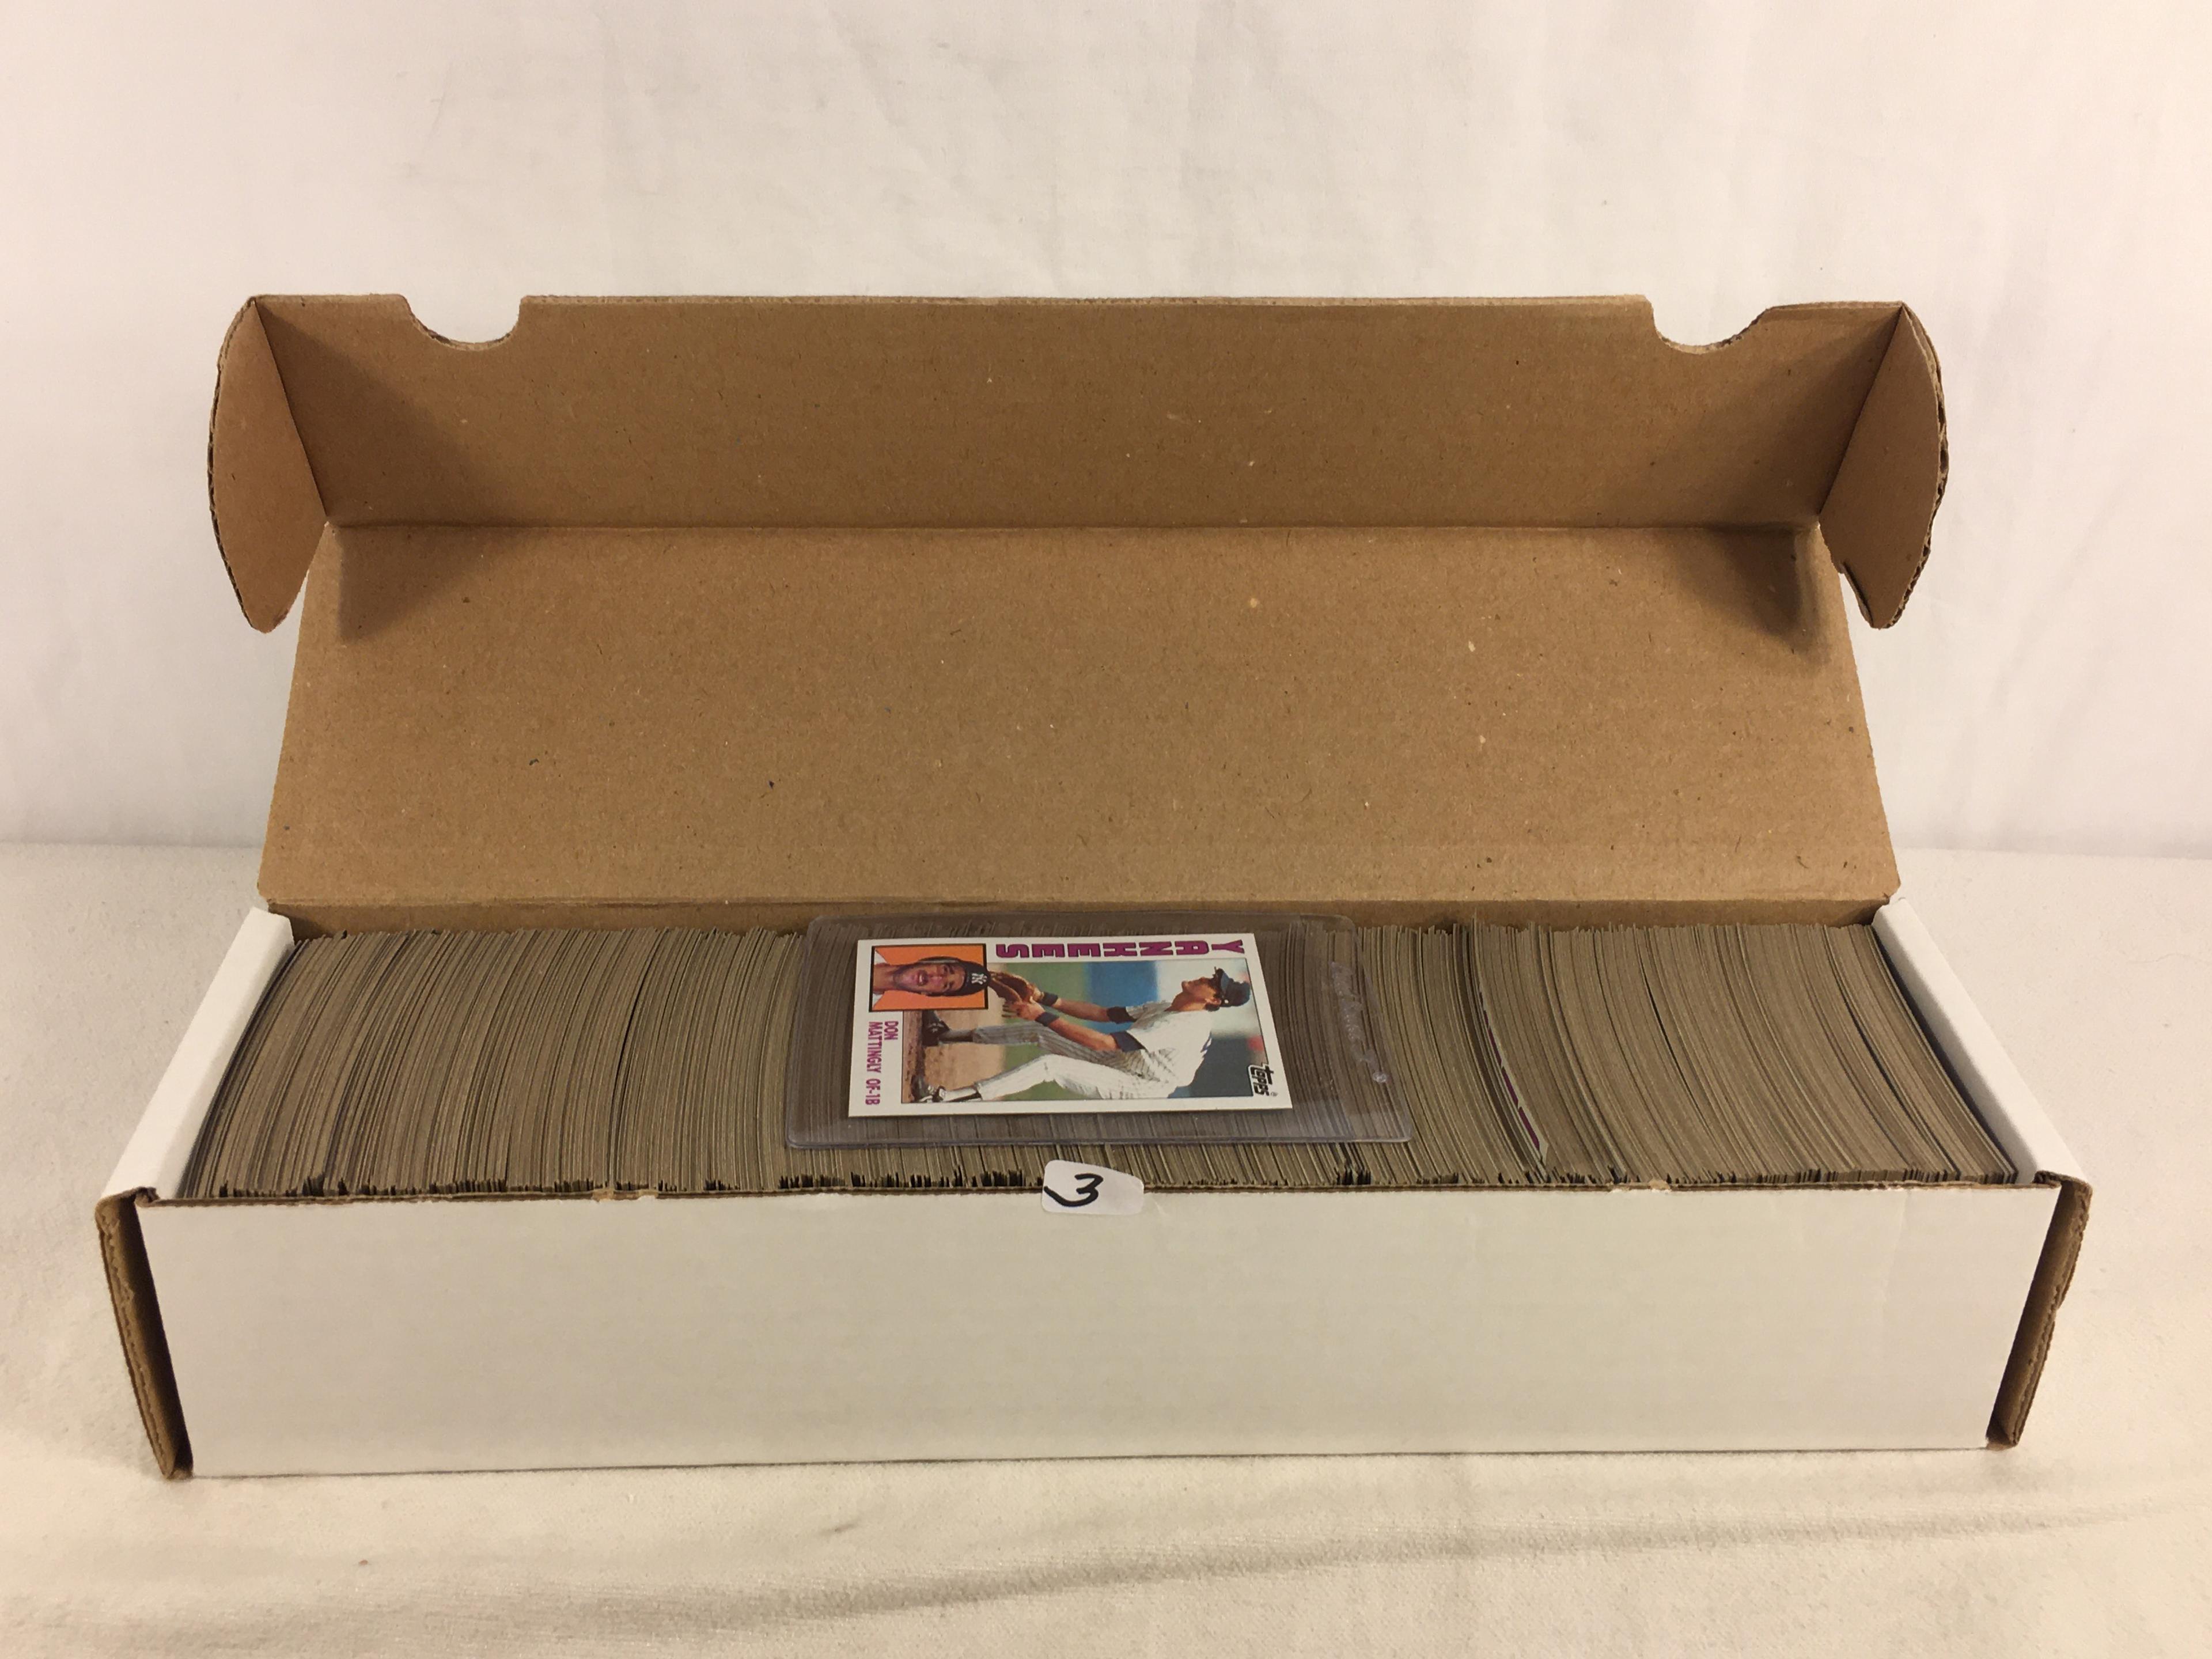 Collector Loose Vintage Topps 1984 Vintage Baseball Trading Cards In A Box